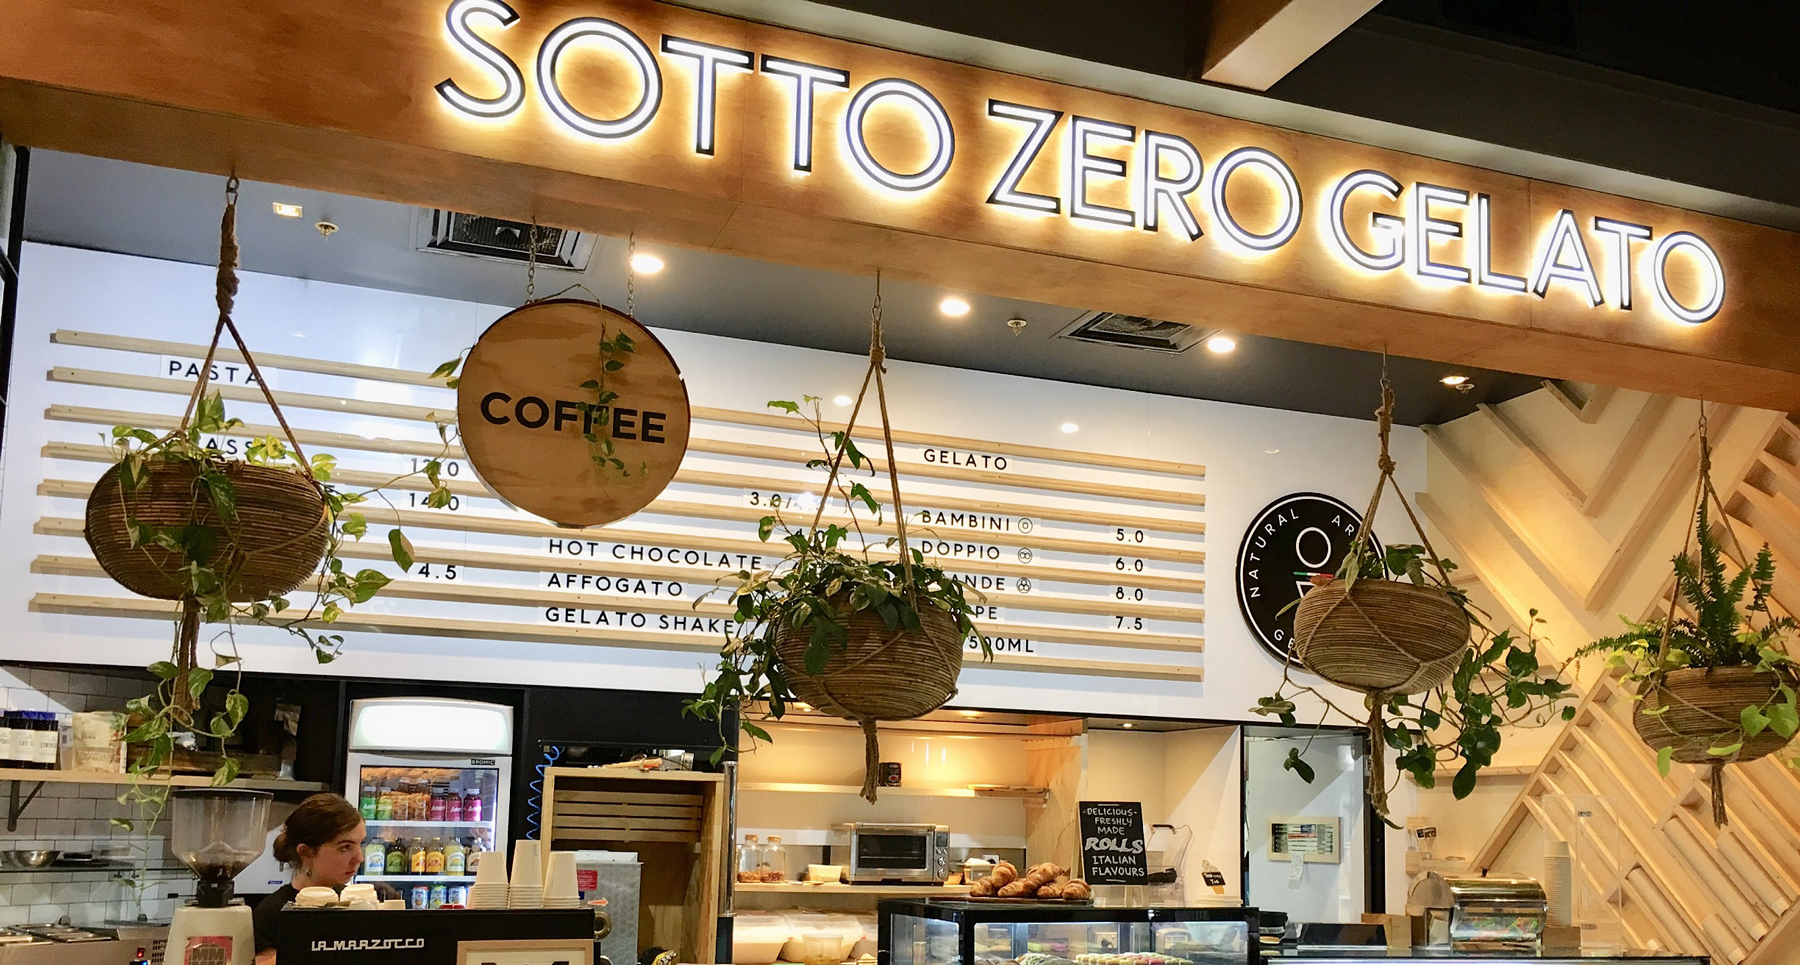 Why there’s kindness in a cup of coffee – Sotto Zero Gelato